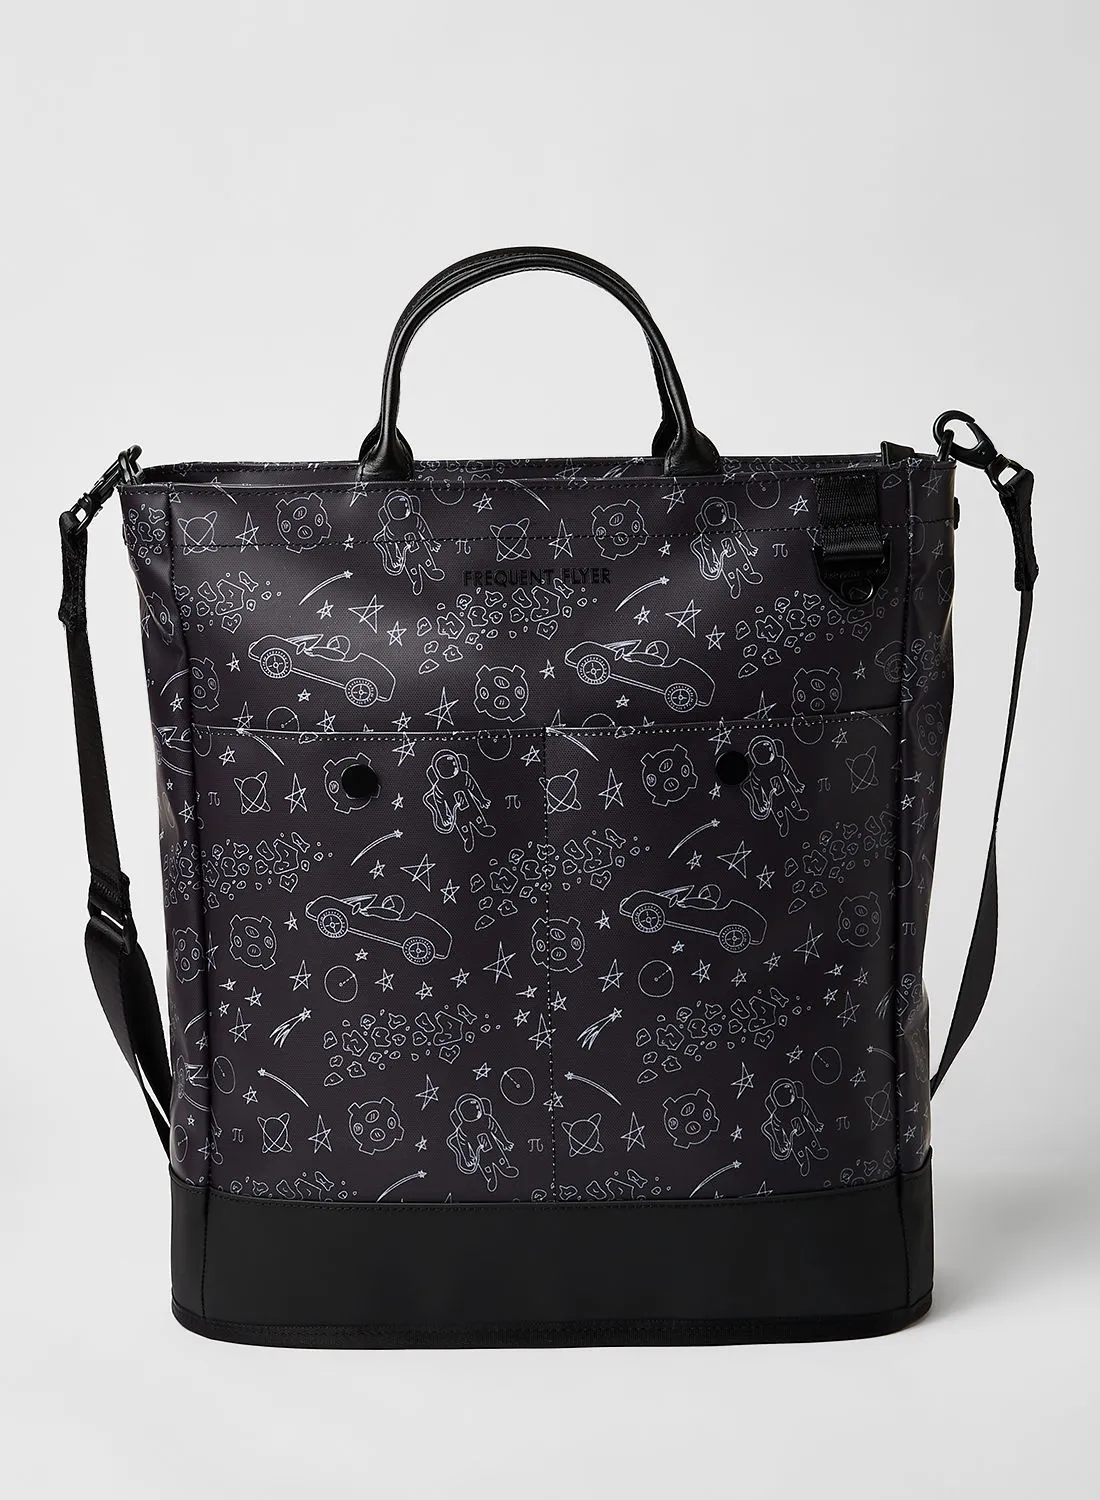 FREQUENT FLYER Graphic Printed Square Tote Bag Black